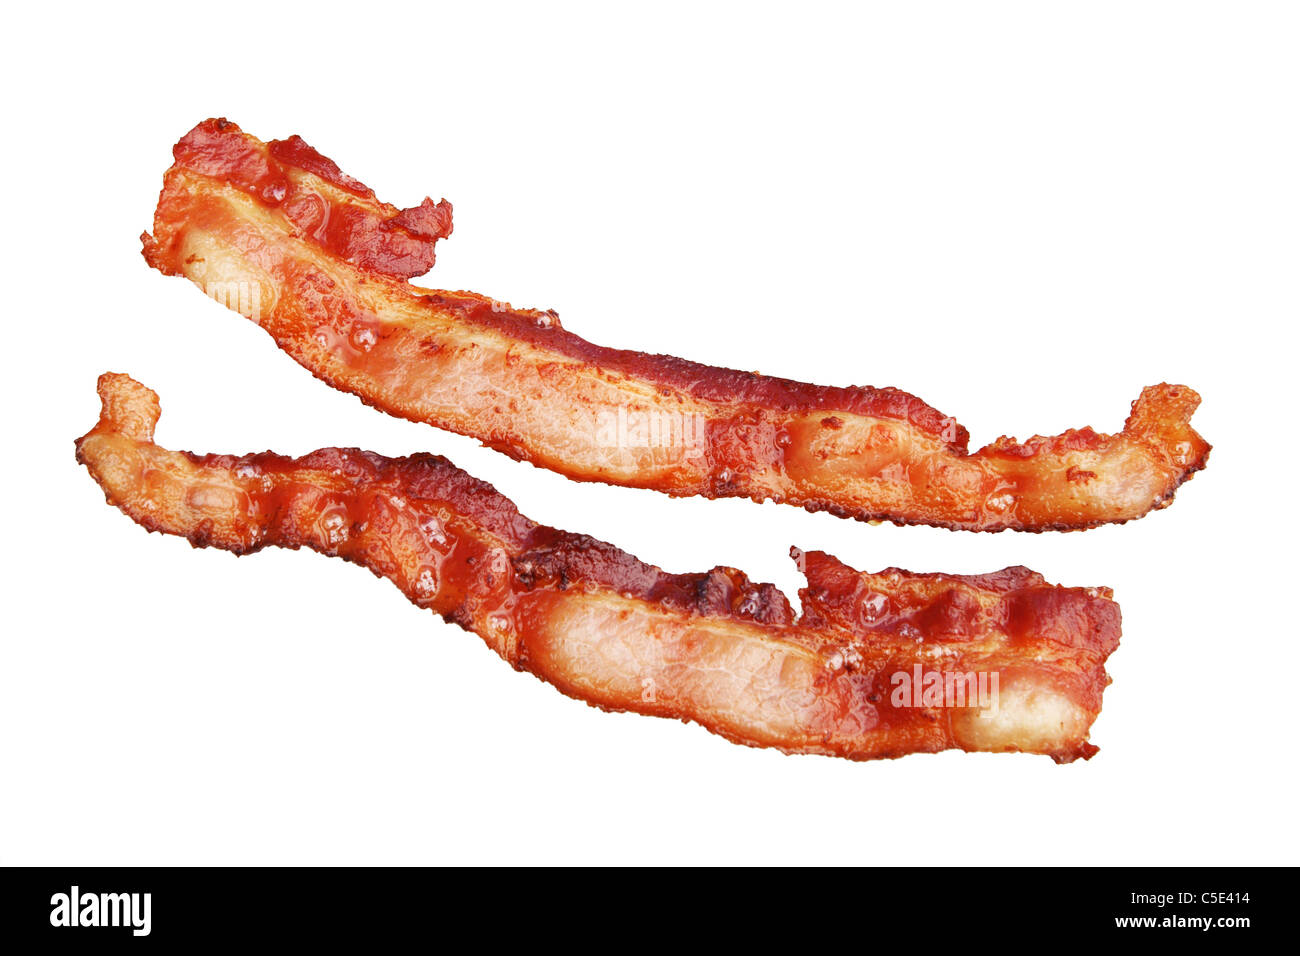 two strips of cooked bacon isolated on white background Stock Photo